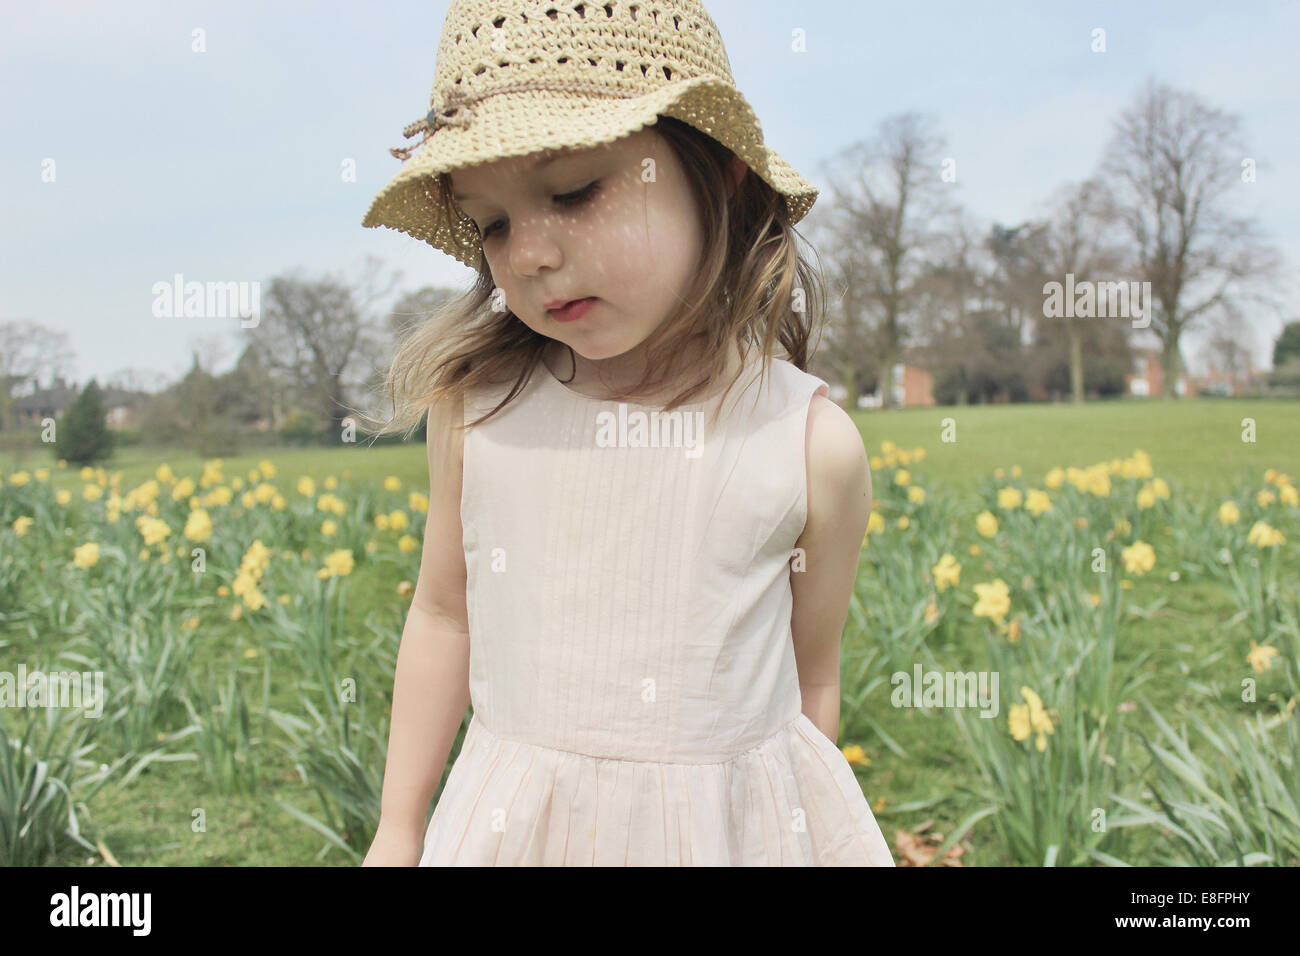 Girl wearing a straw hat standing in a field Stock Photo